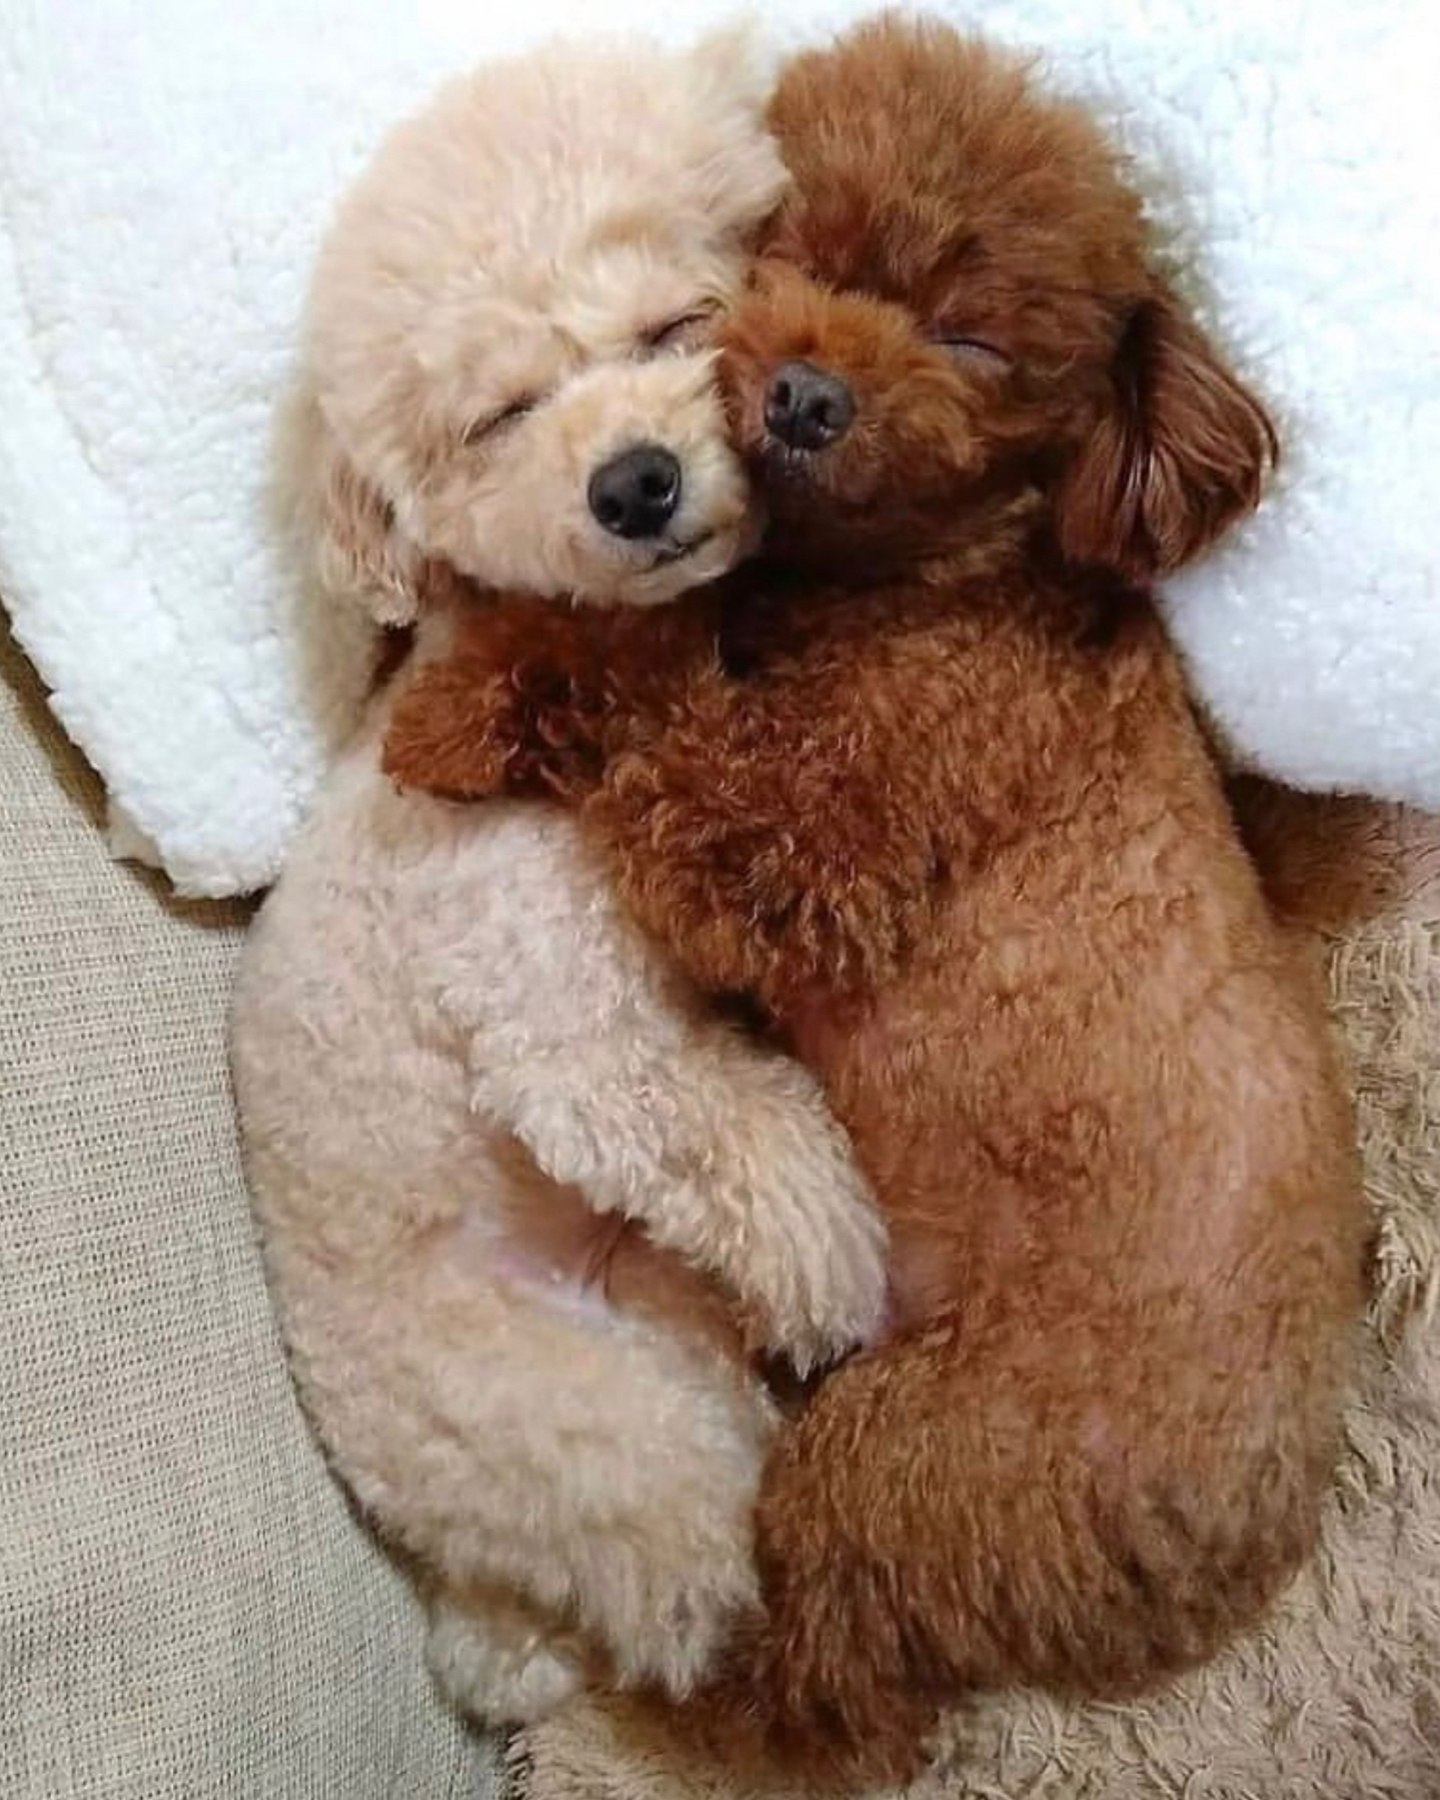 Two Poodles cuddling while someone wonders what is the rarest Poodle color